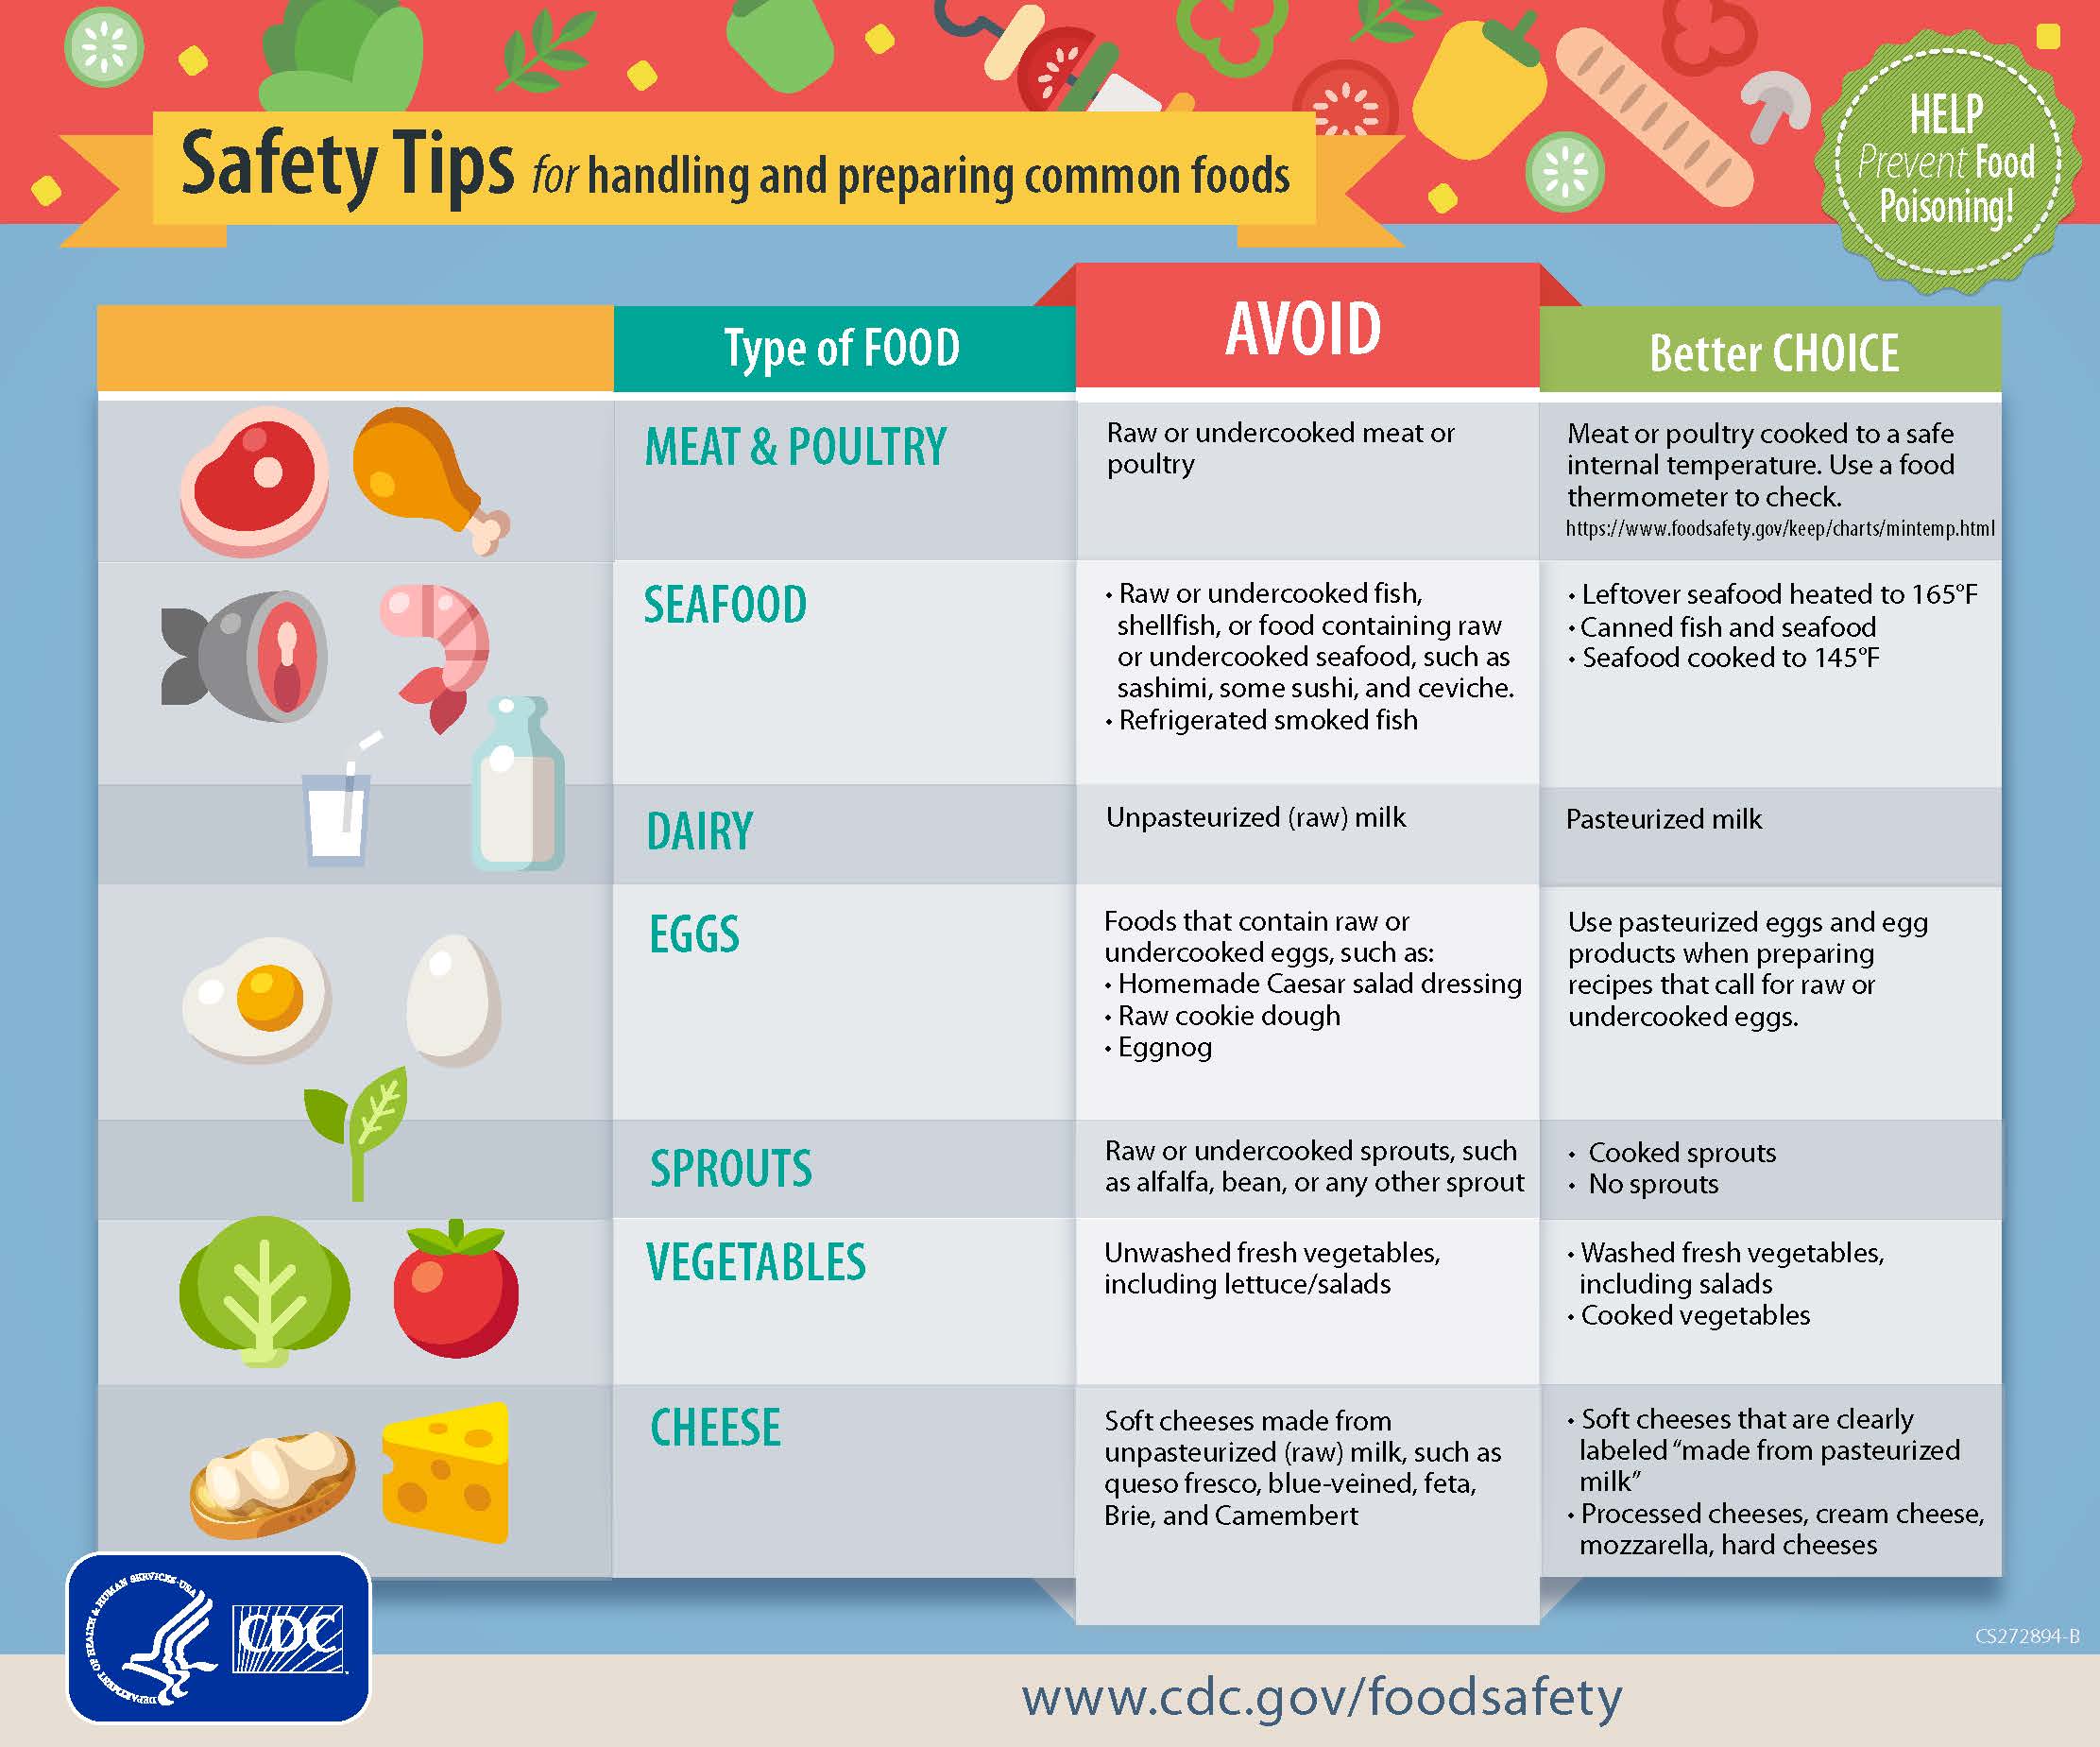 Safety tips for handling and preparing common foods.